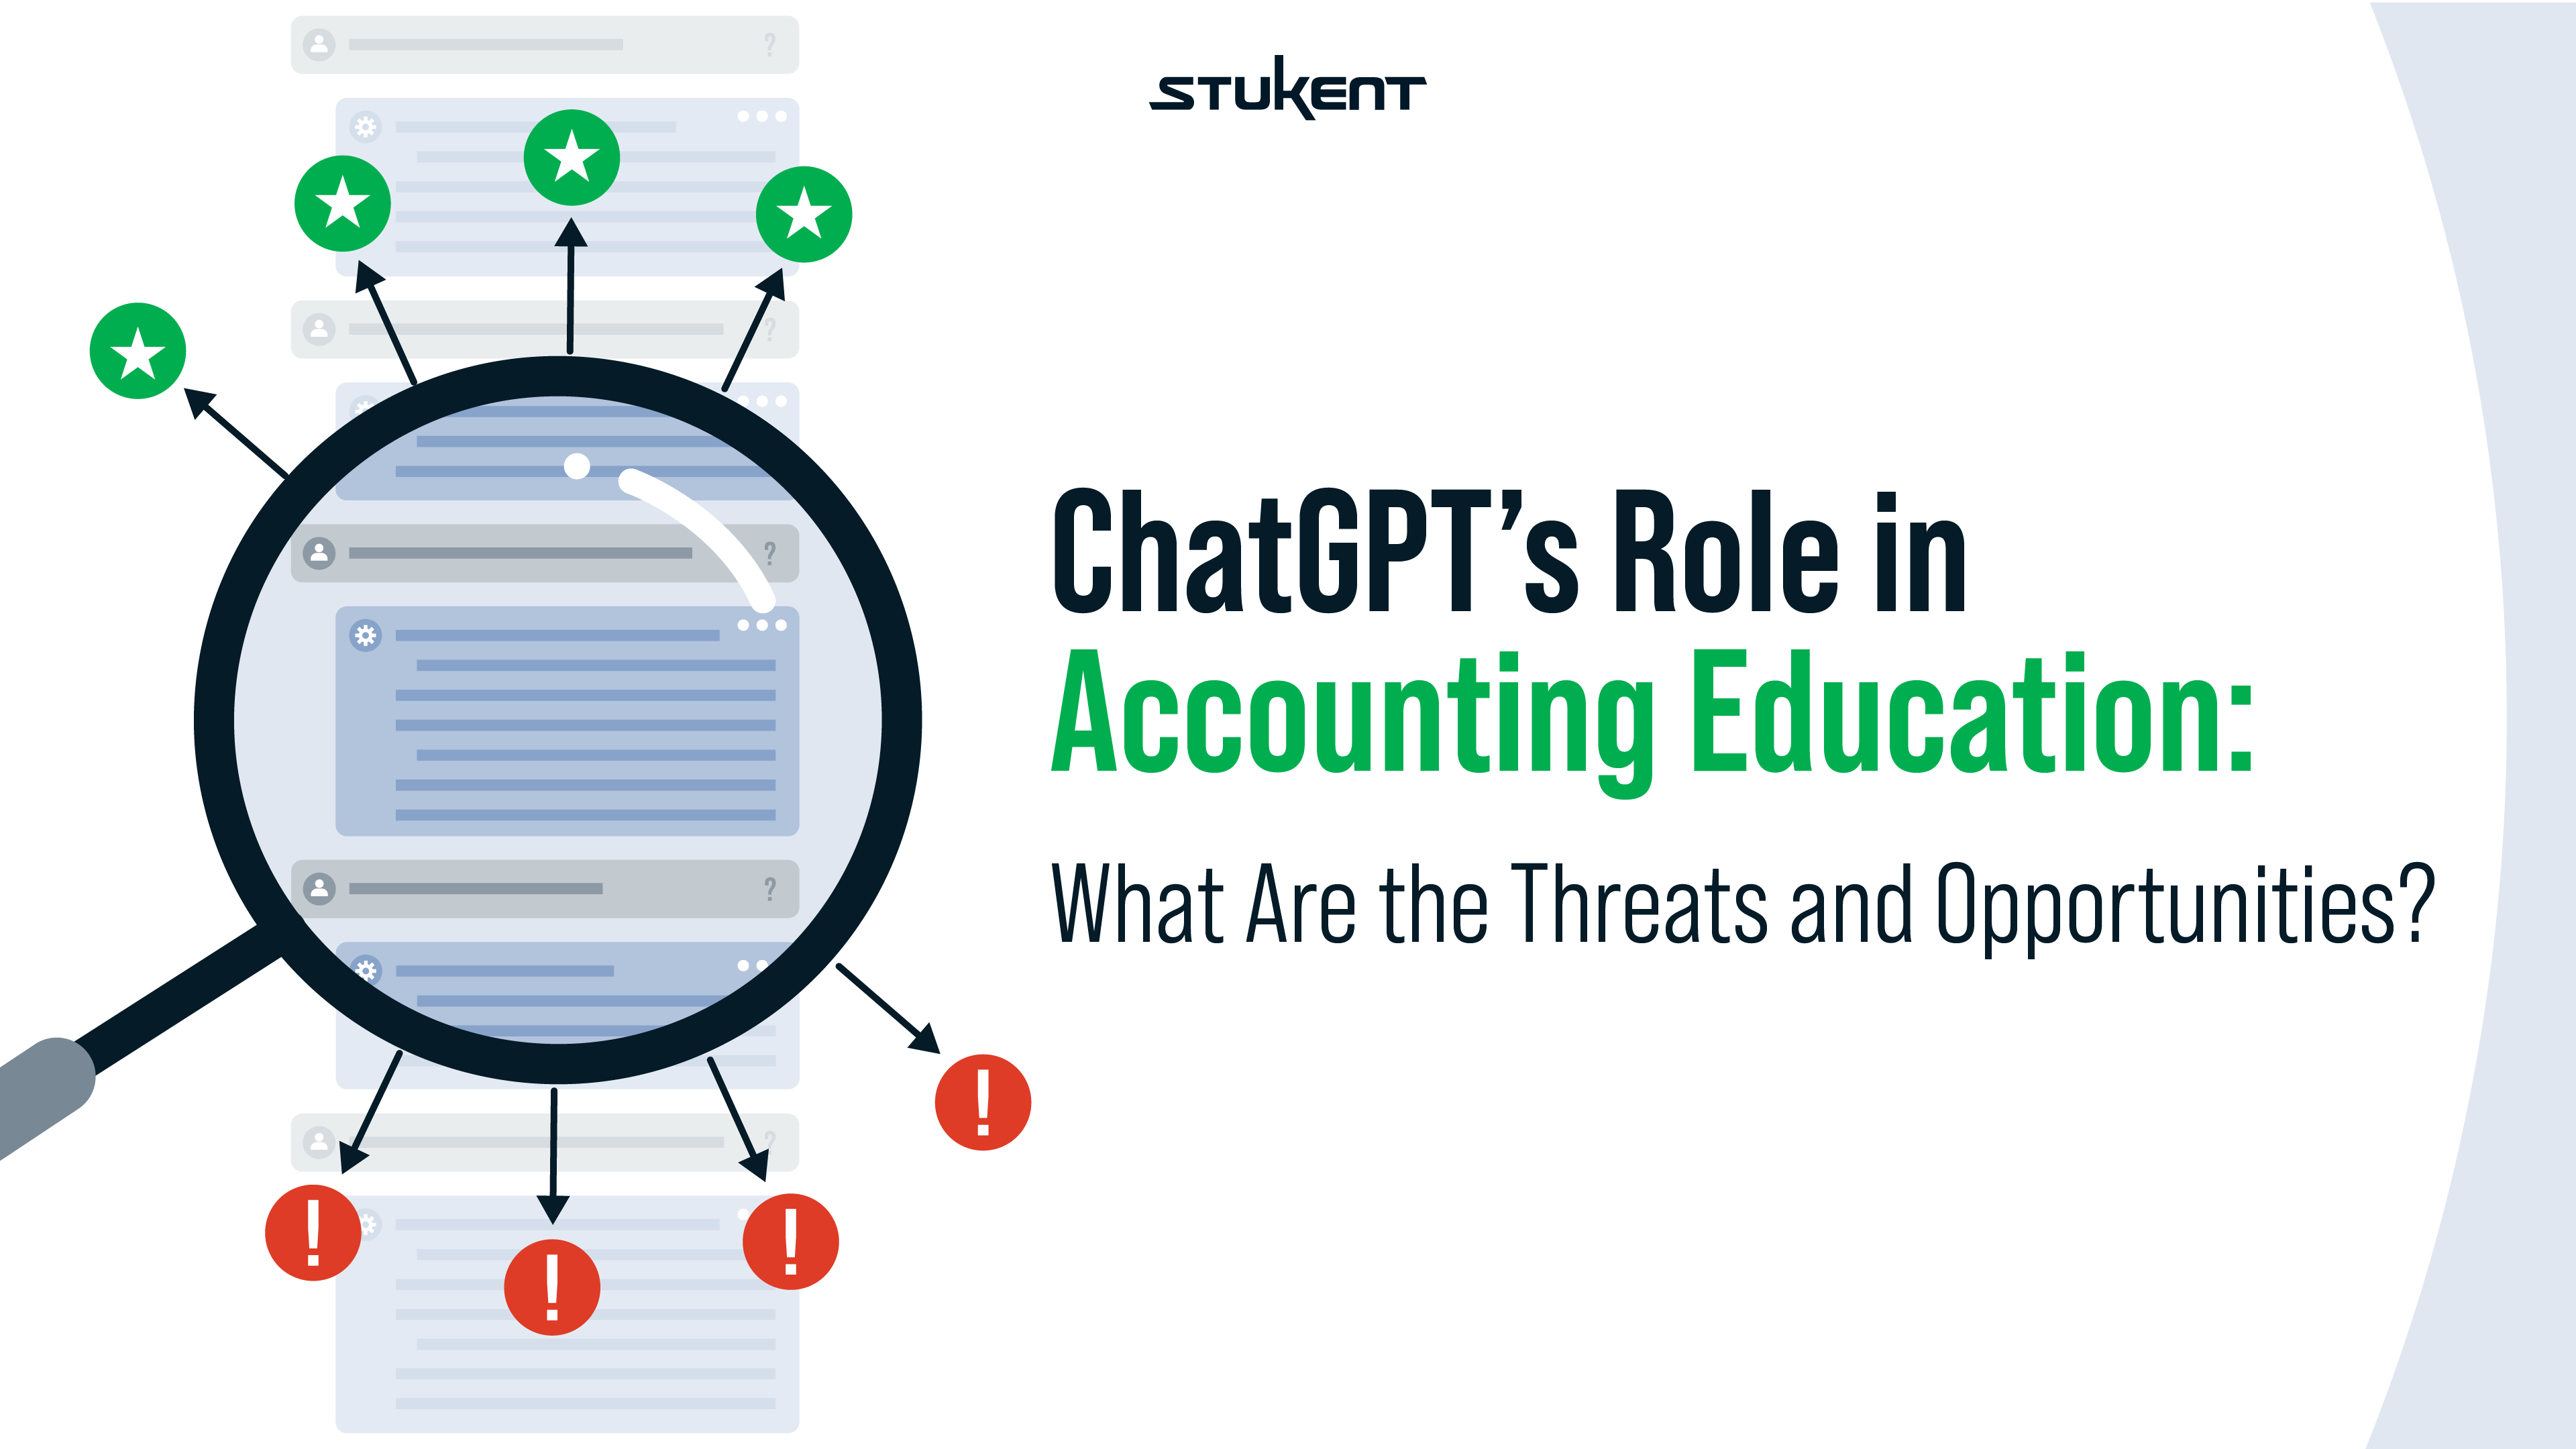 ChatGPT's Role in Accounting Education